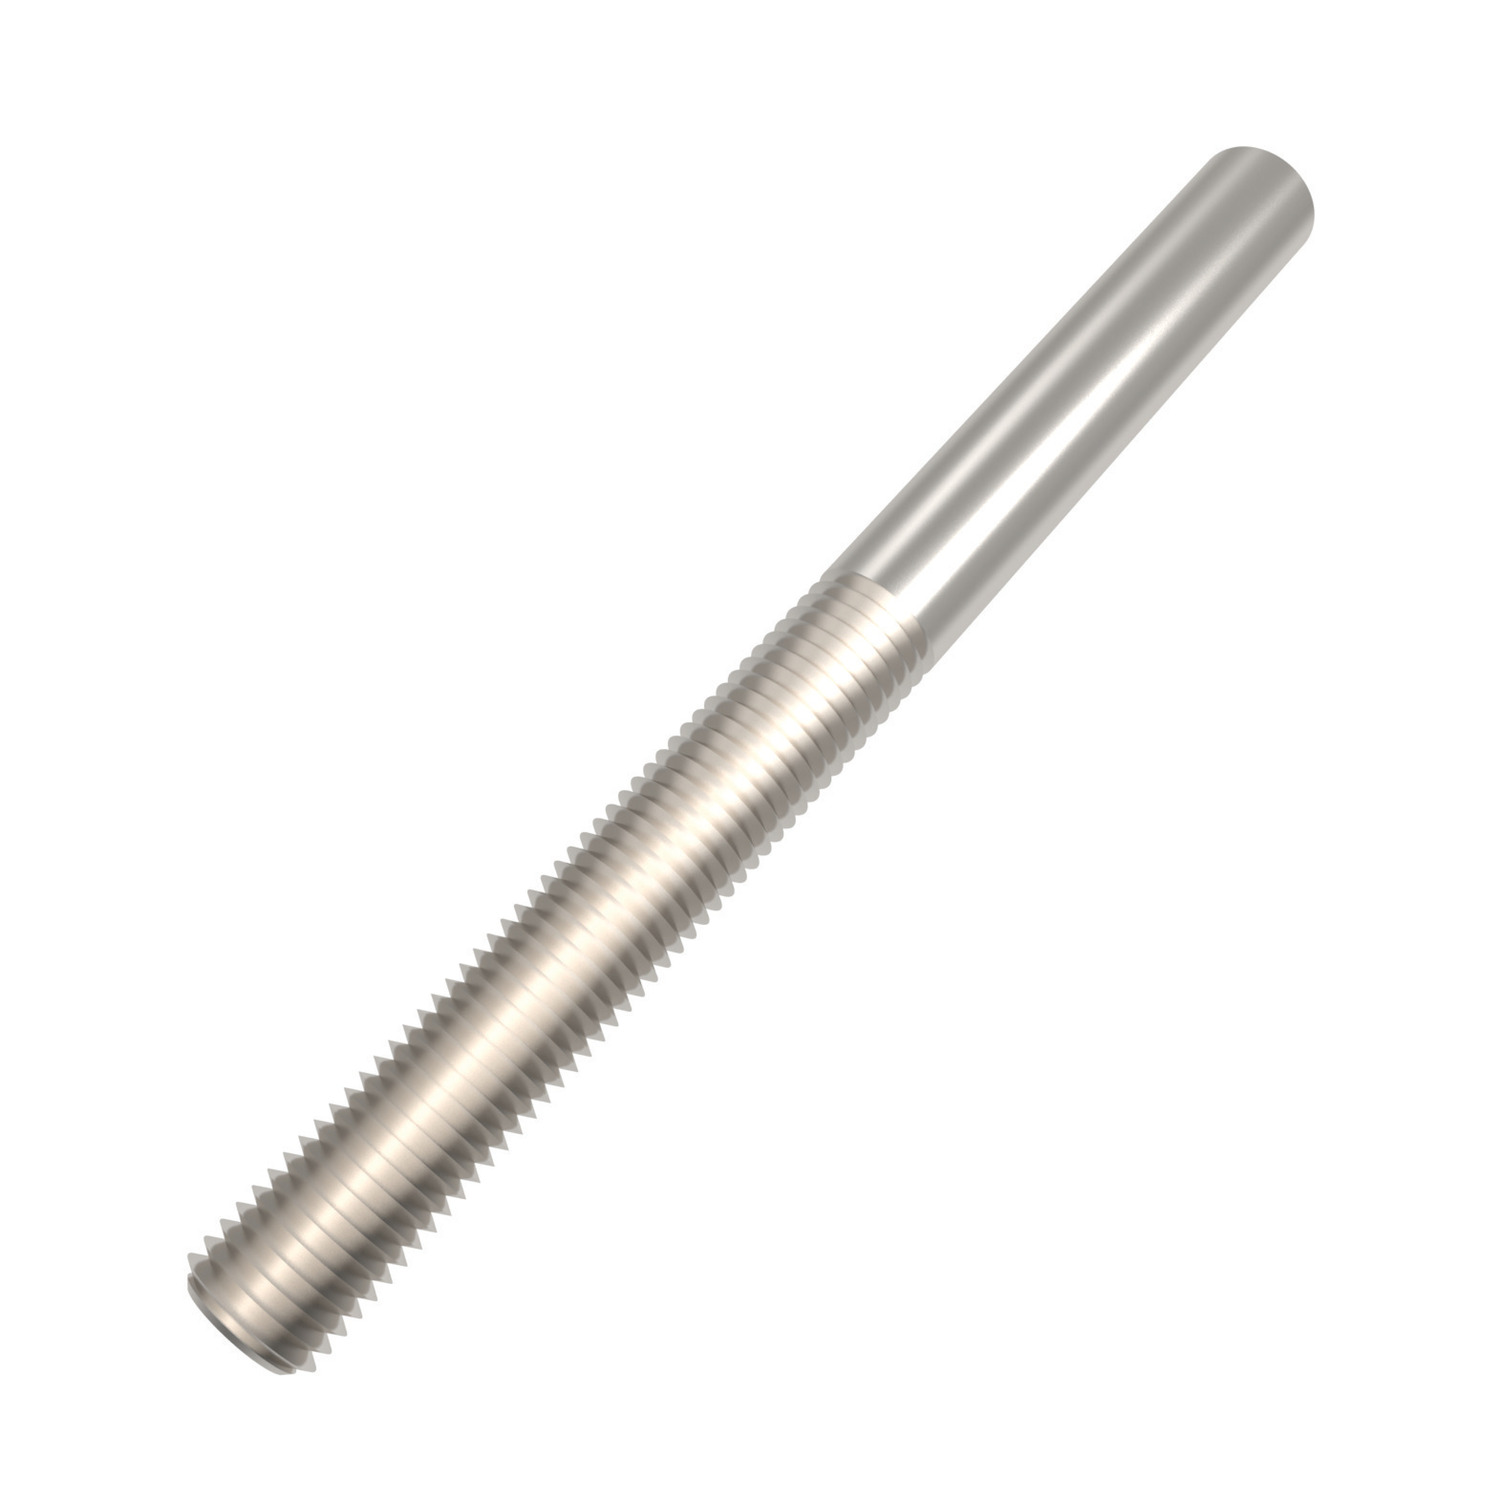 R3868.L010-A4 Welding Studs LH M10 A4 s/s Not to be used for lifting unless SWL marked.